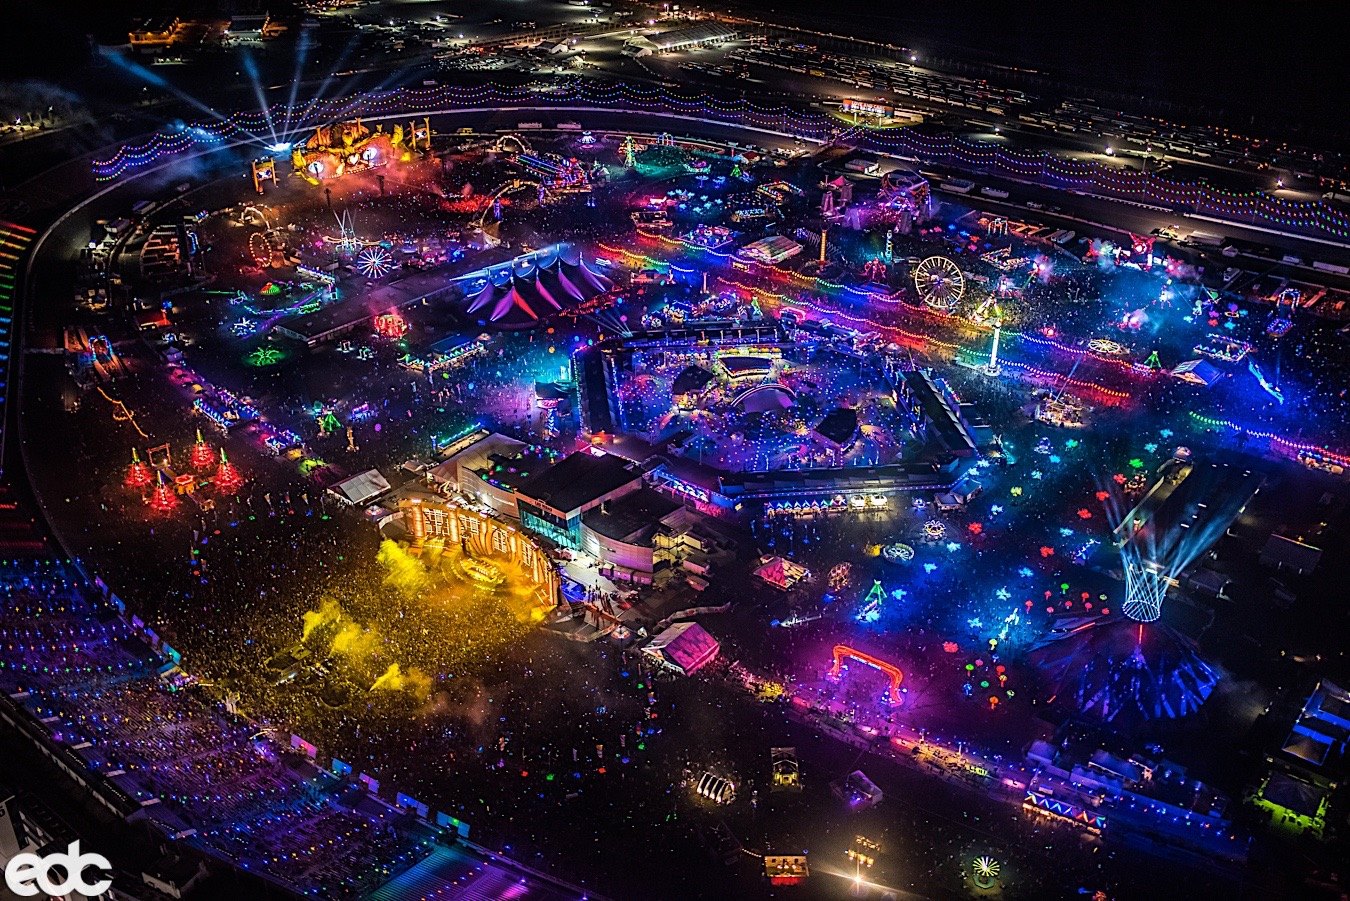 Special Events Will Add To Traffic During EDC 2018 Weekend